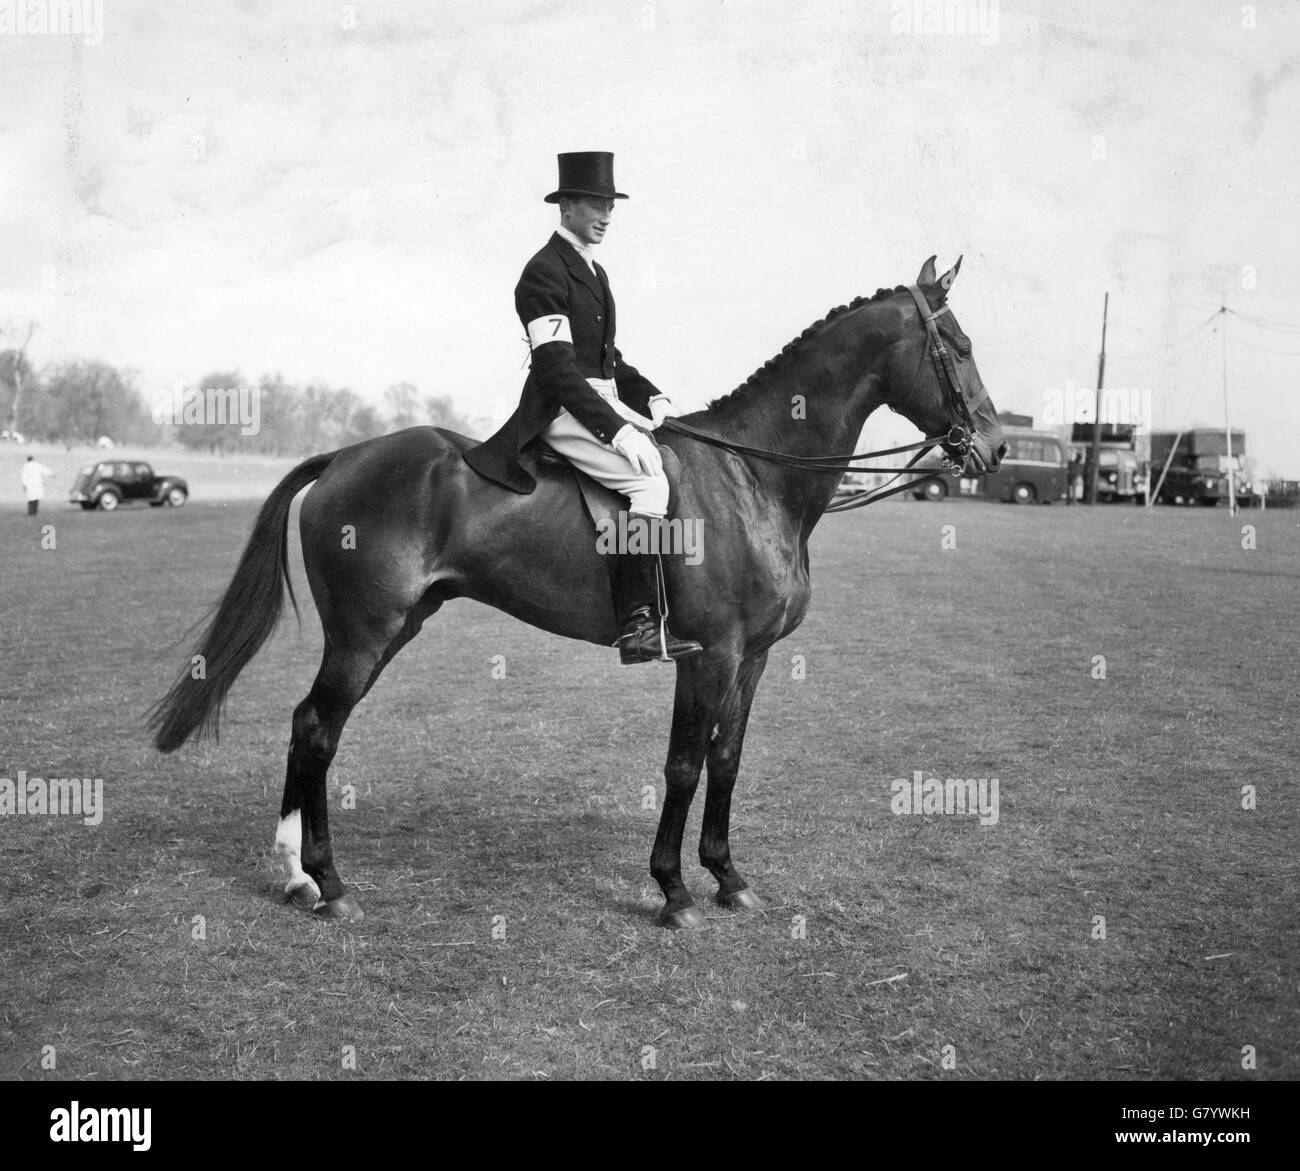 Bertie Hill, riding the Queen's horse Countryman III, at the Badminton horse trials taking place in the grounds of Badminton House, Gloucestershire, home of the Duke and Duchess of Beaufort. Mr Hill rode him in the dressage event. Stock Photo